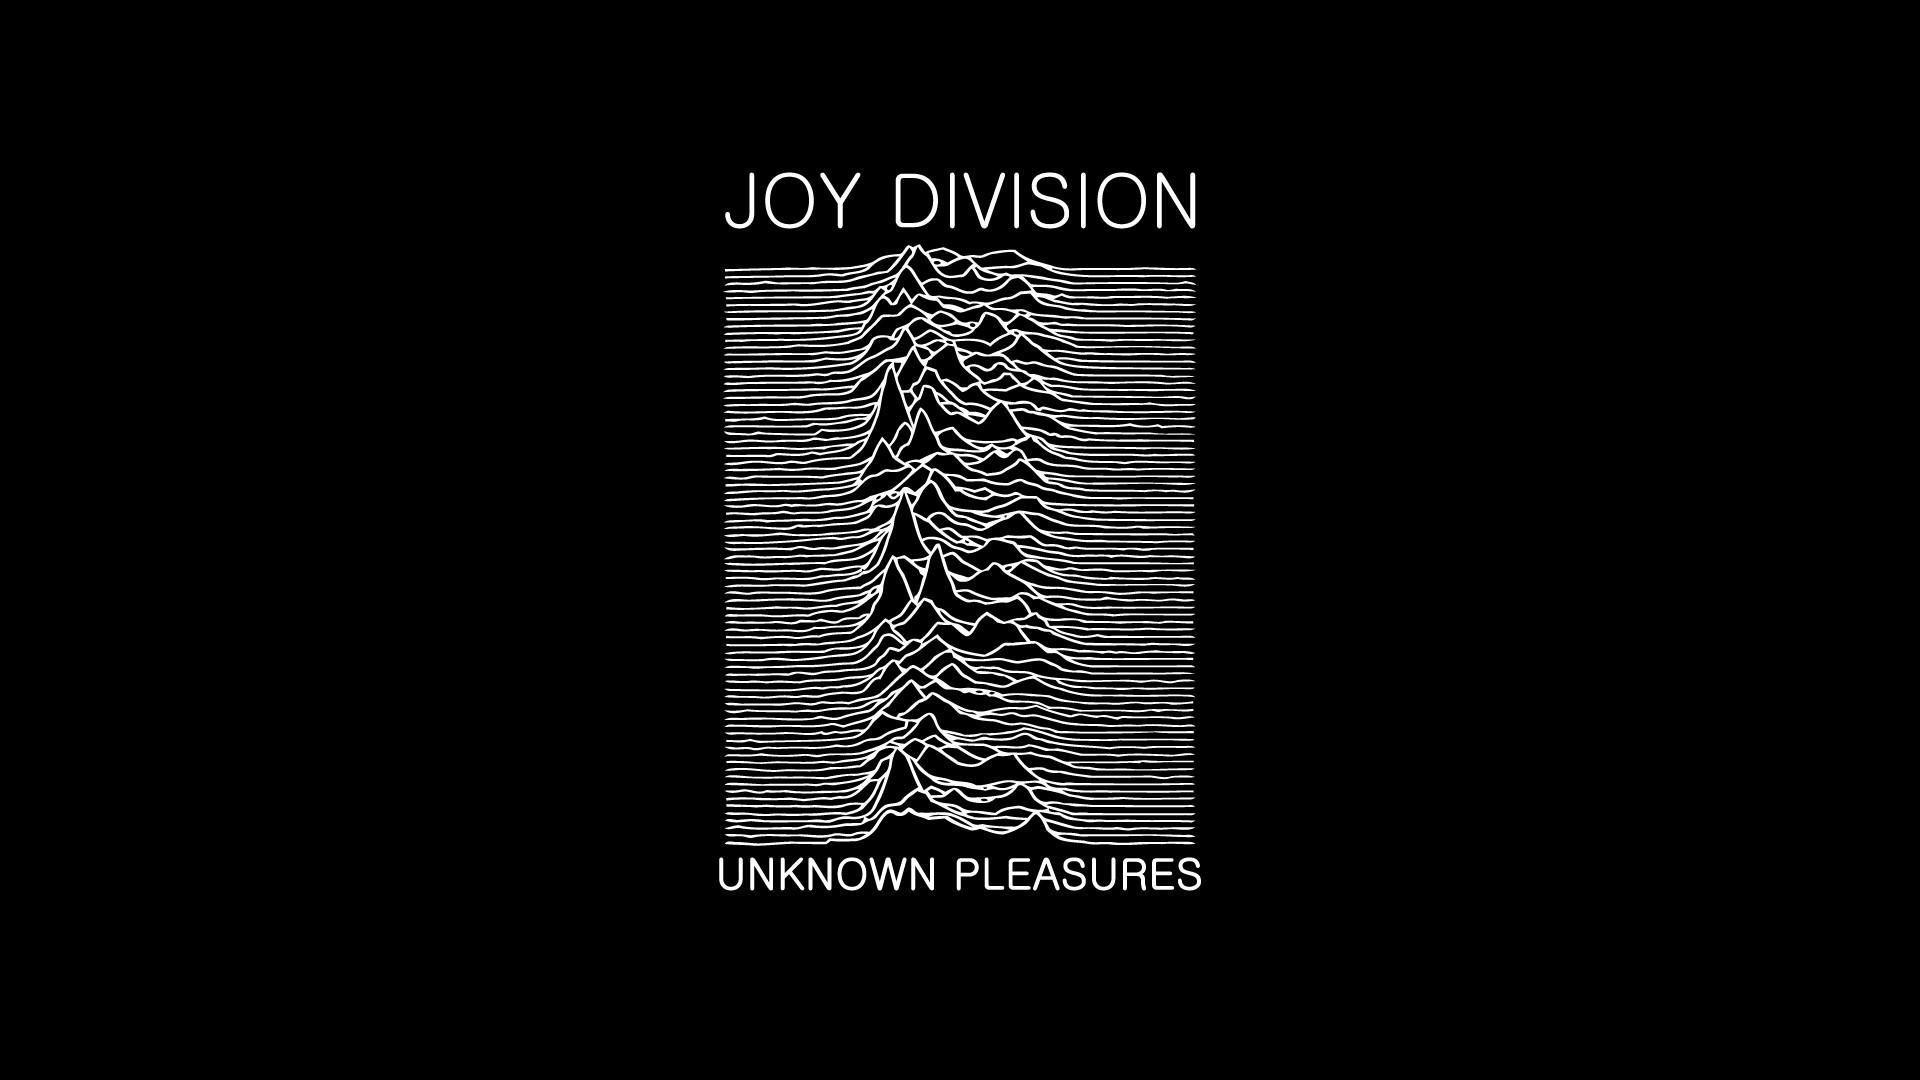 Classic Albums Covered - Unknown Pleasures - XRaydio